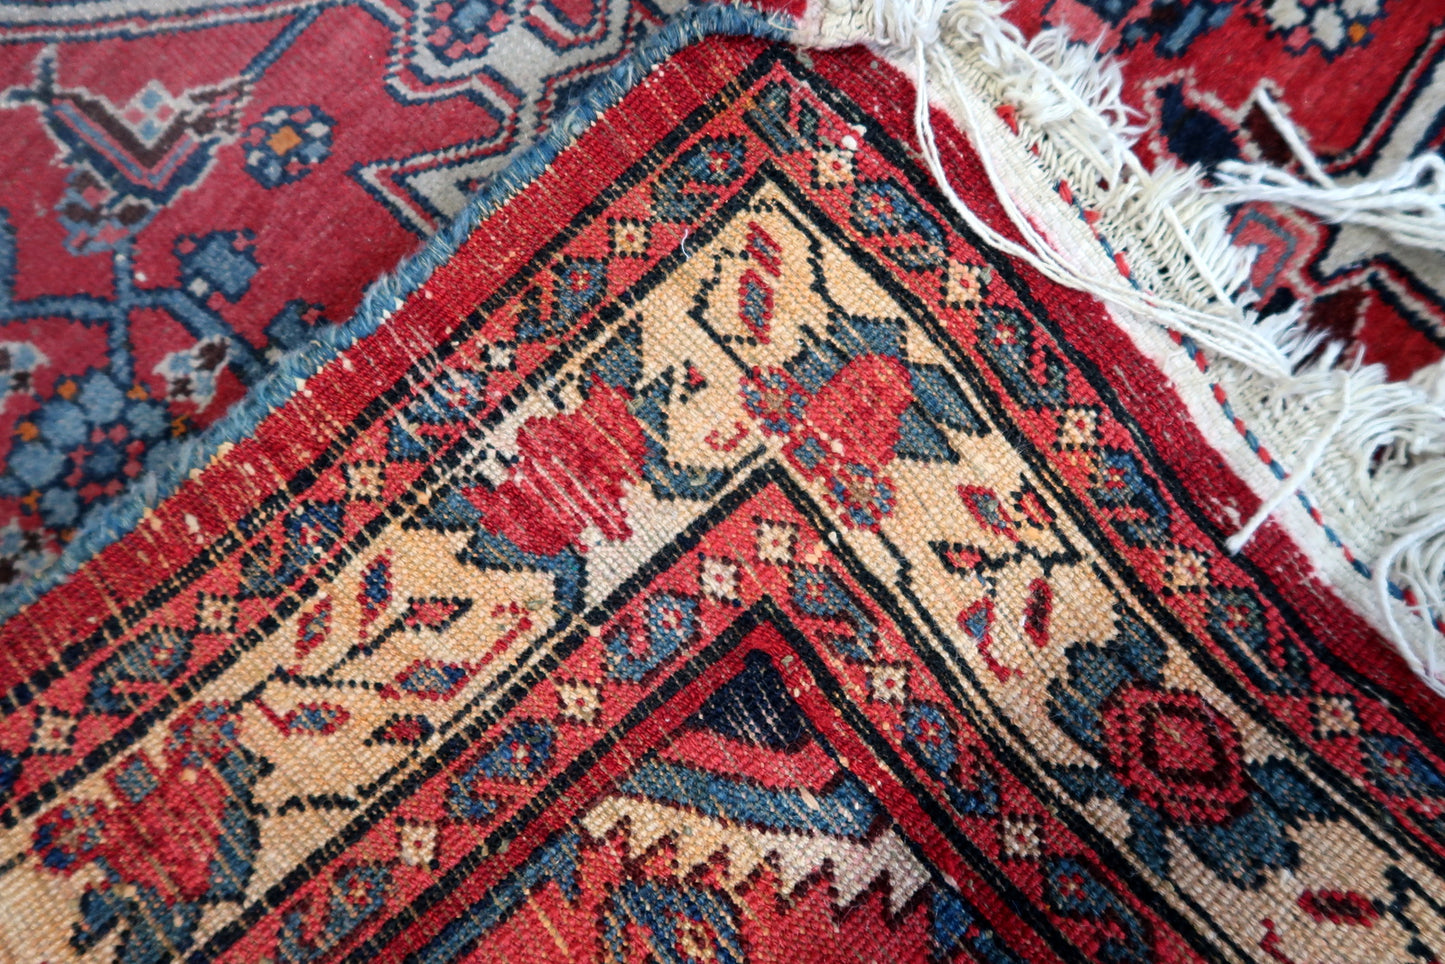 Back side of the Handmade Vintage Persian Bidjar Rug - Underside view revealing the rug's construction and material.